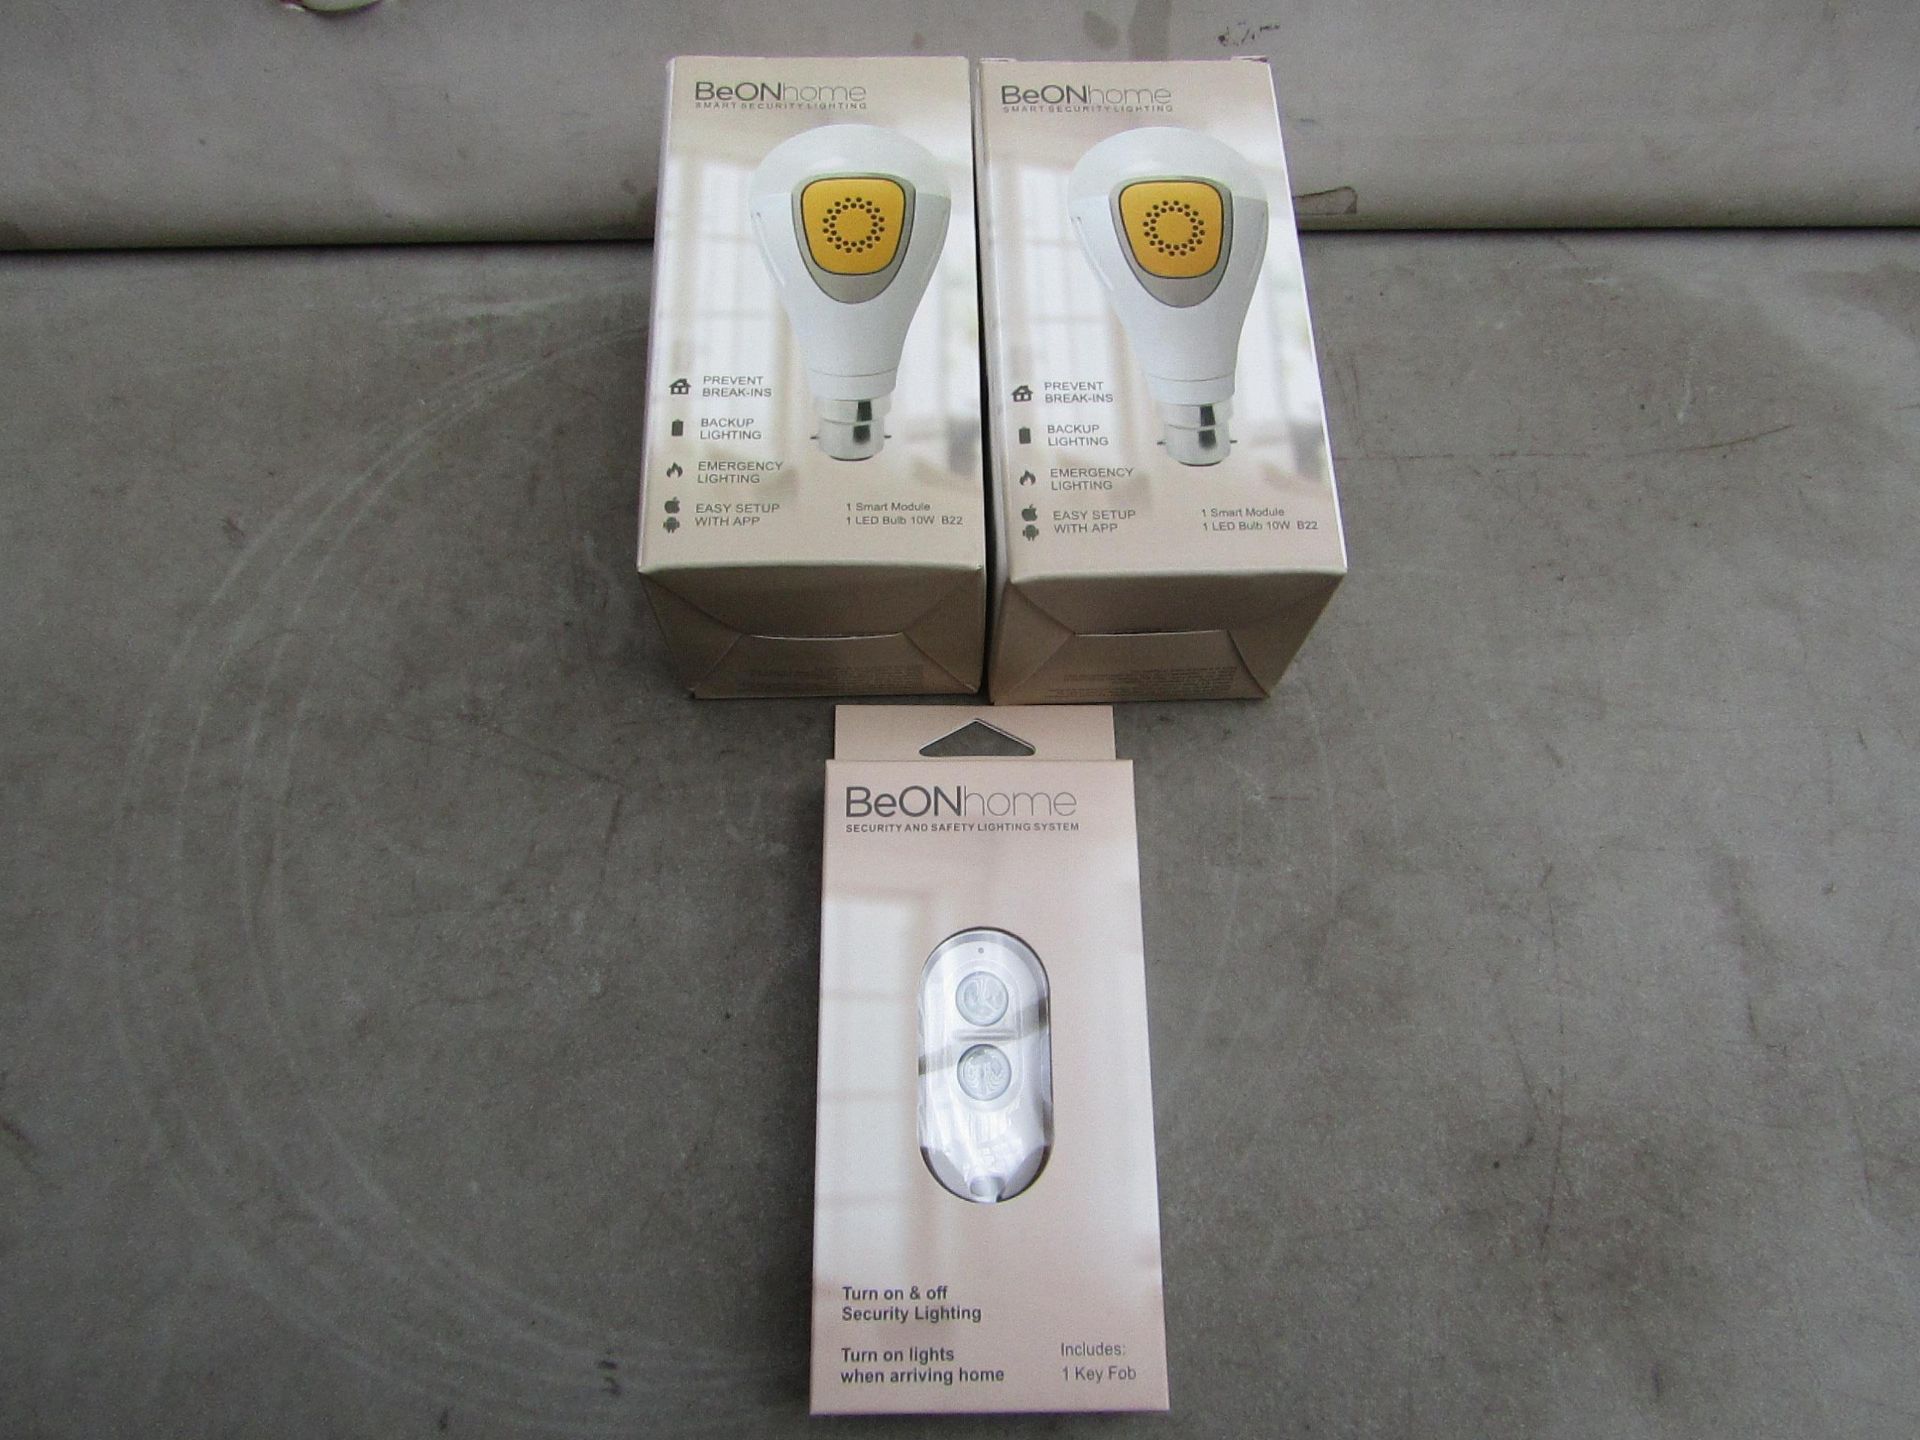 3x BeOn Home items being 2 Smart aop controlled Light Bulbs and a Blue tooth remote control